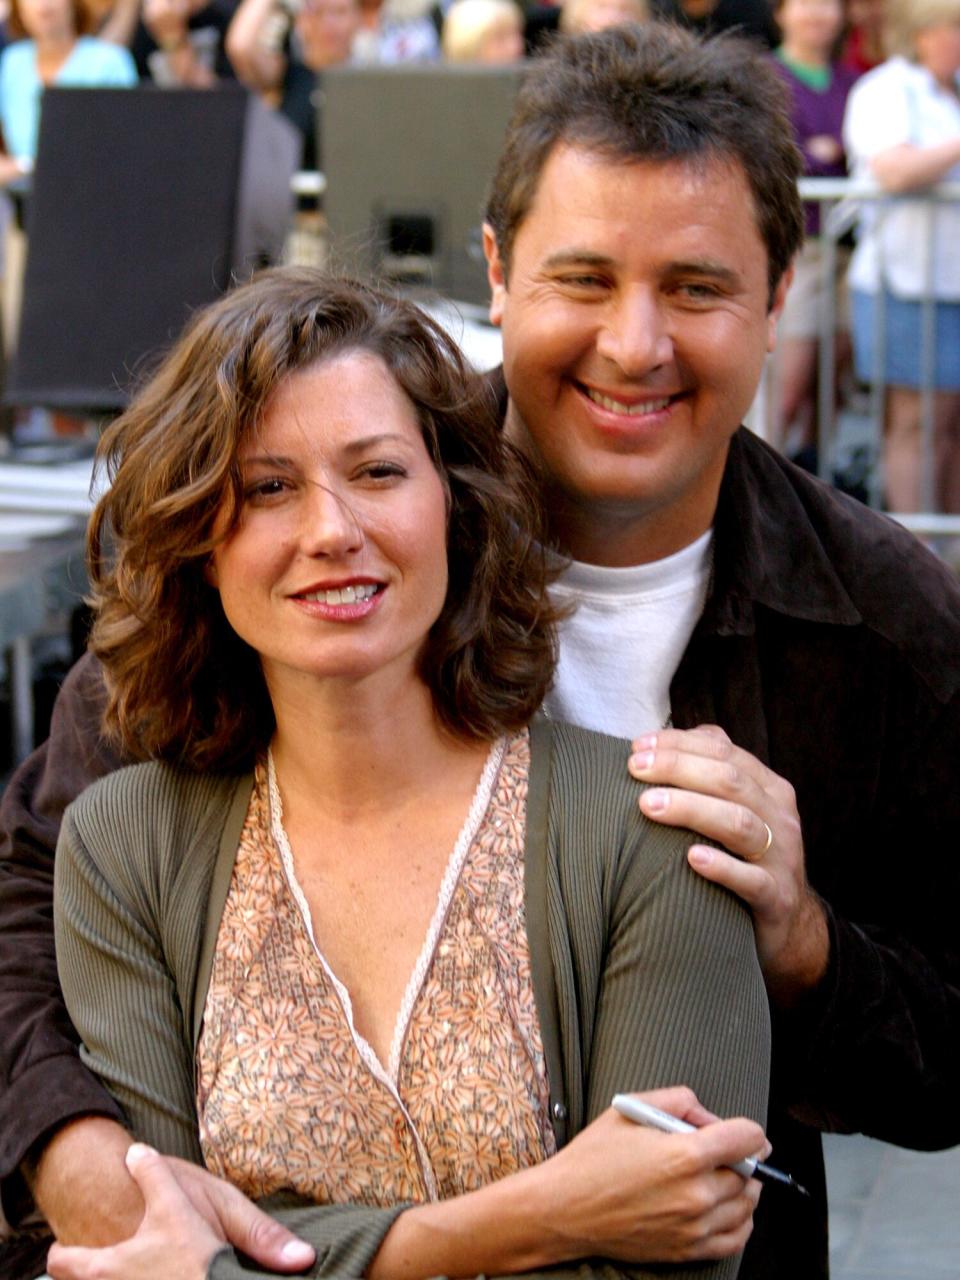 Amy Grant and husband Vince Gill during Amy Grant and Vince Gill Perform on The Today Show Summer Concert Series - July 12, 2002 at NBC Studios Rockafeller Center in New York City, New York, United States